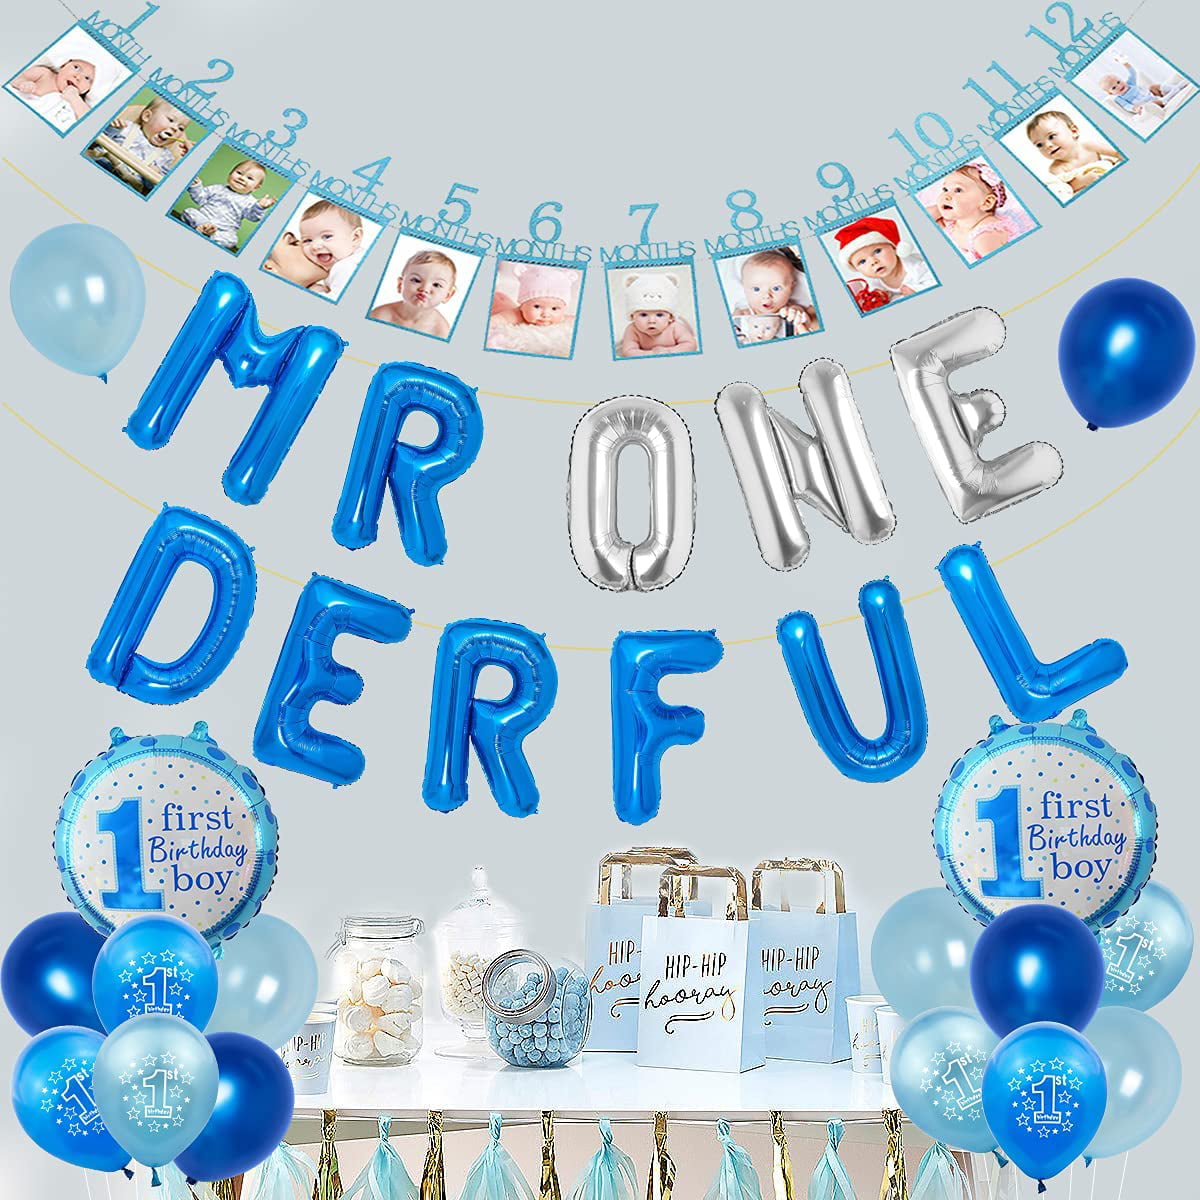 116 PCs Mr Onederful Birthday Decorations, Homond Boys 1st Blue and Gold  Little Man Party Decorations Backdrop Balloon Garland Monthly Photo  Highchair